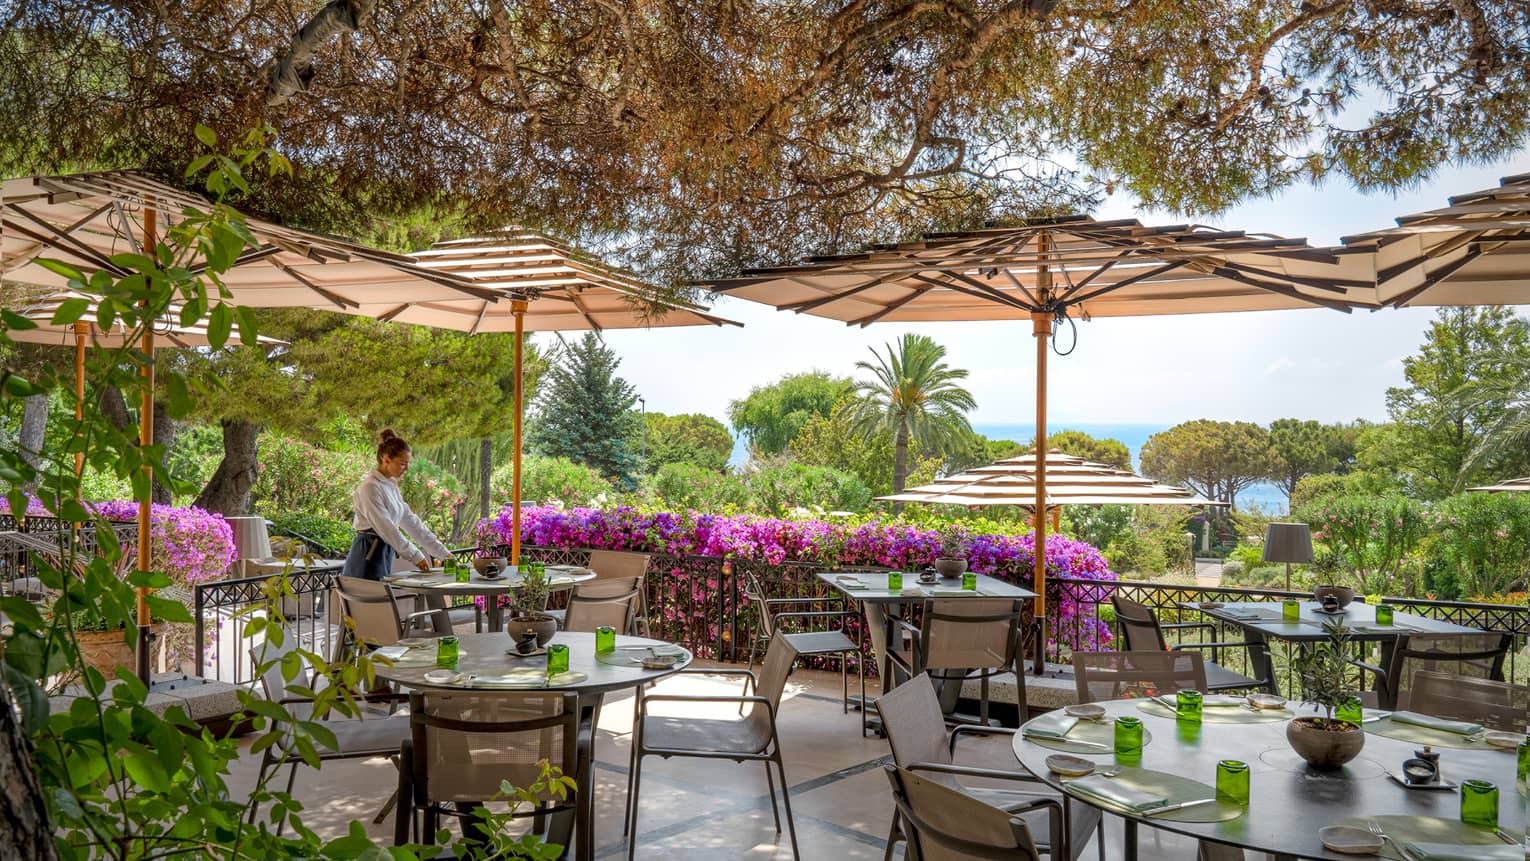 Waiter sets a table on outdoor restaurant terrace, surrounded by greenery and magenta-coloured flowers